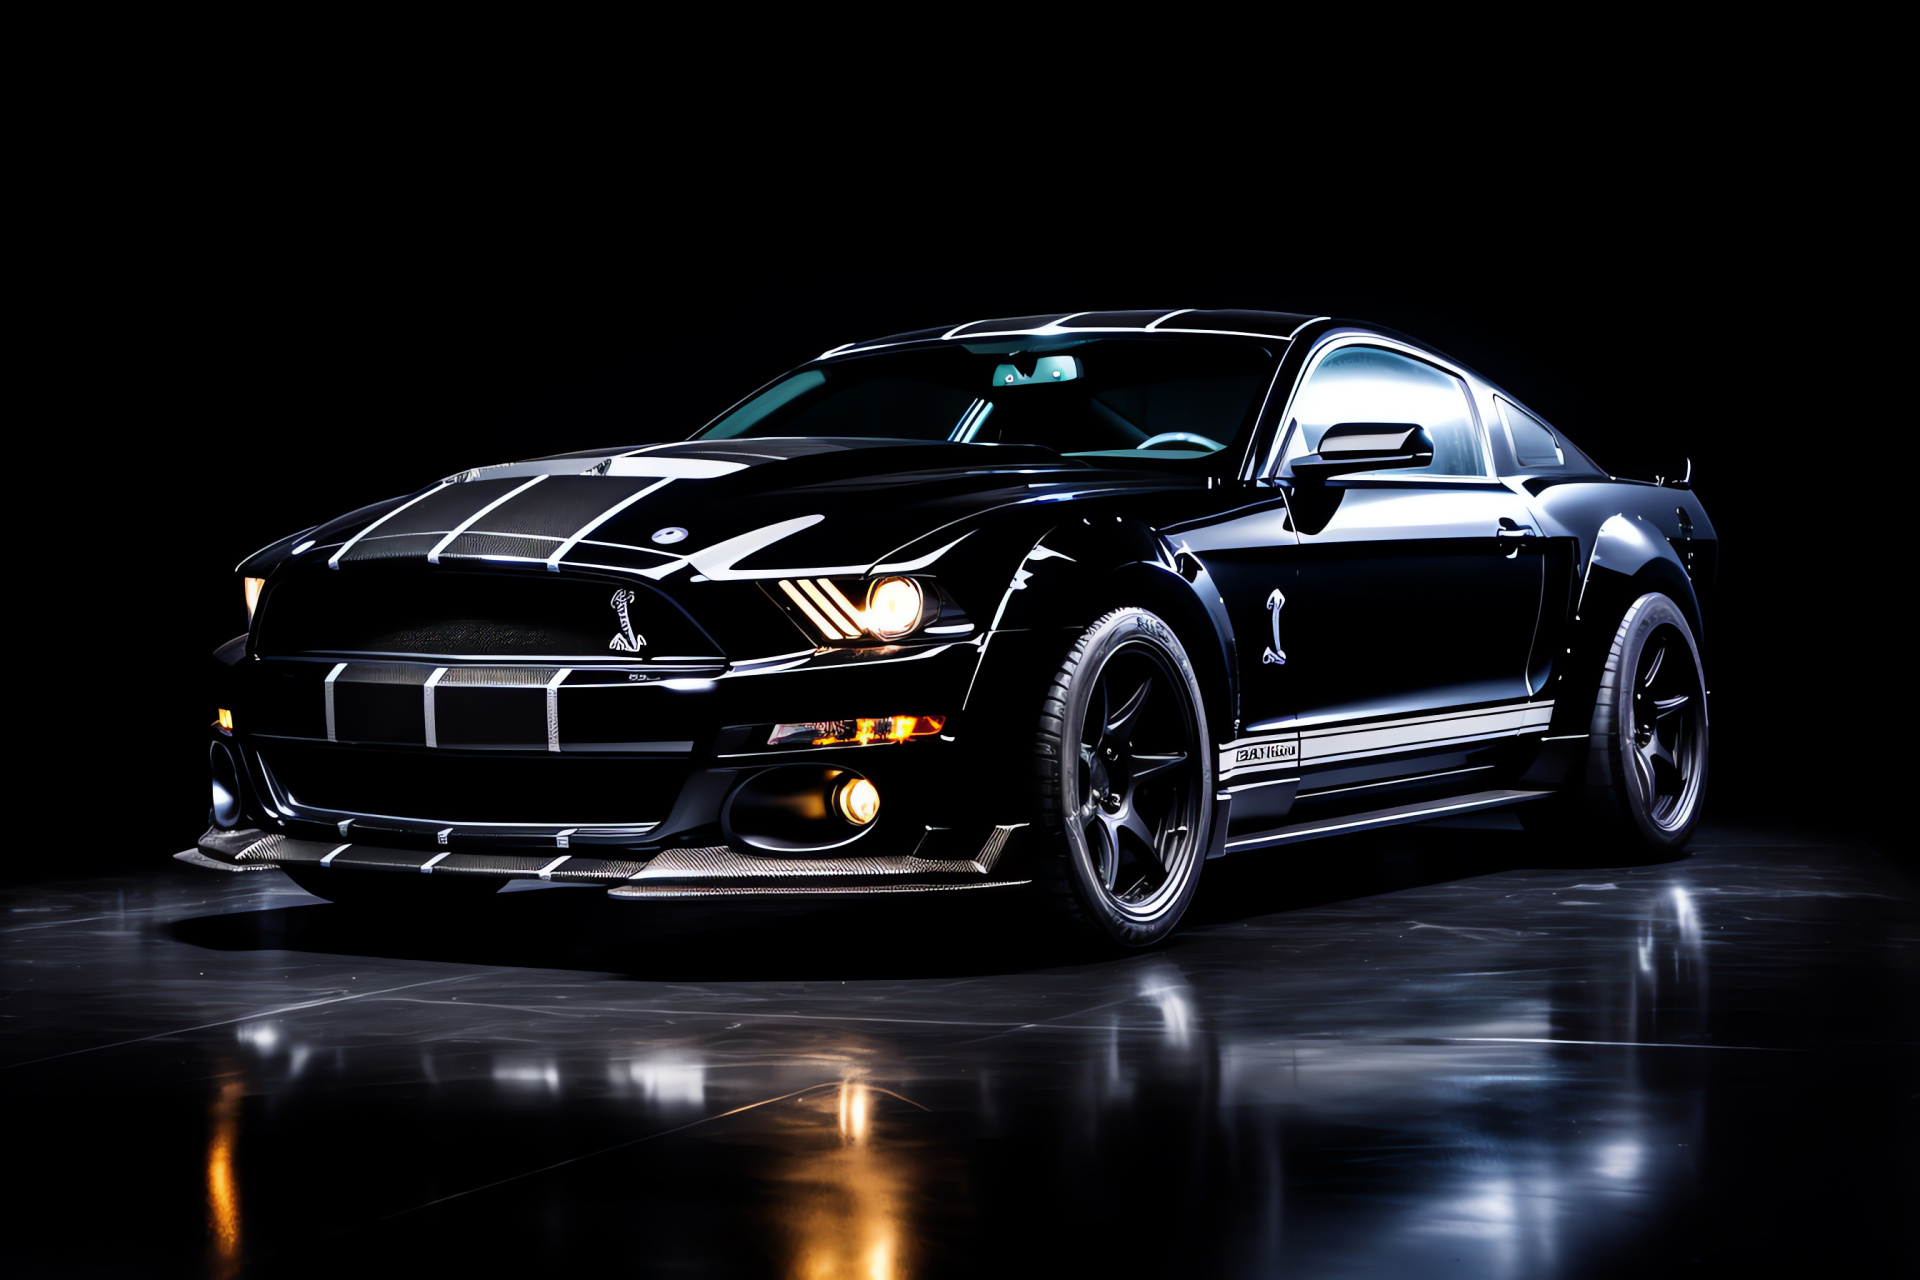 Mustang power, Elevated angle intensity, Dark backdrop, Striking auto features, Assertive stance, HD Desktop Image